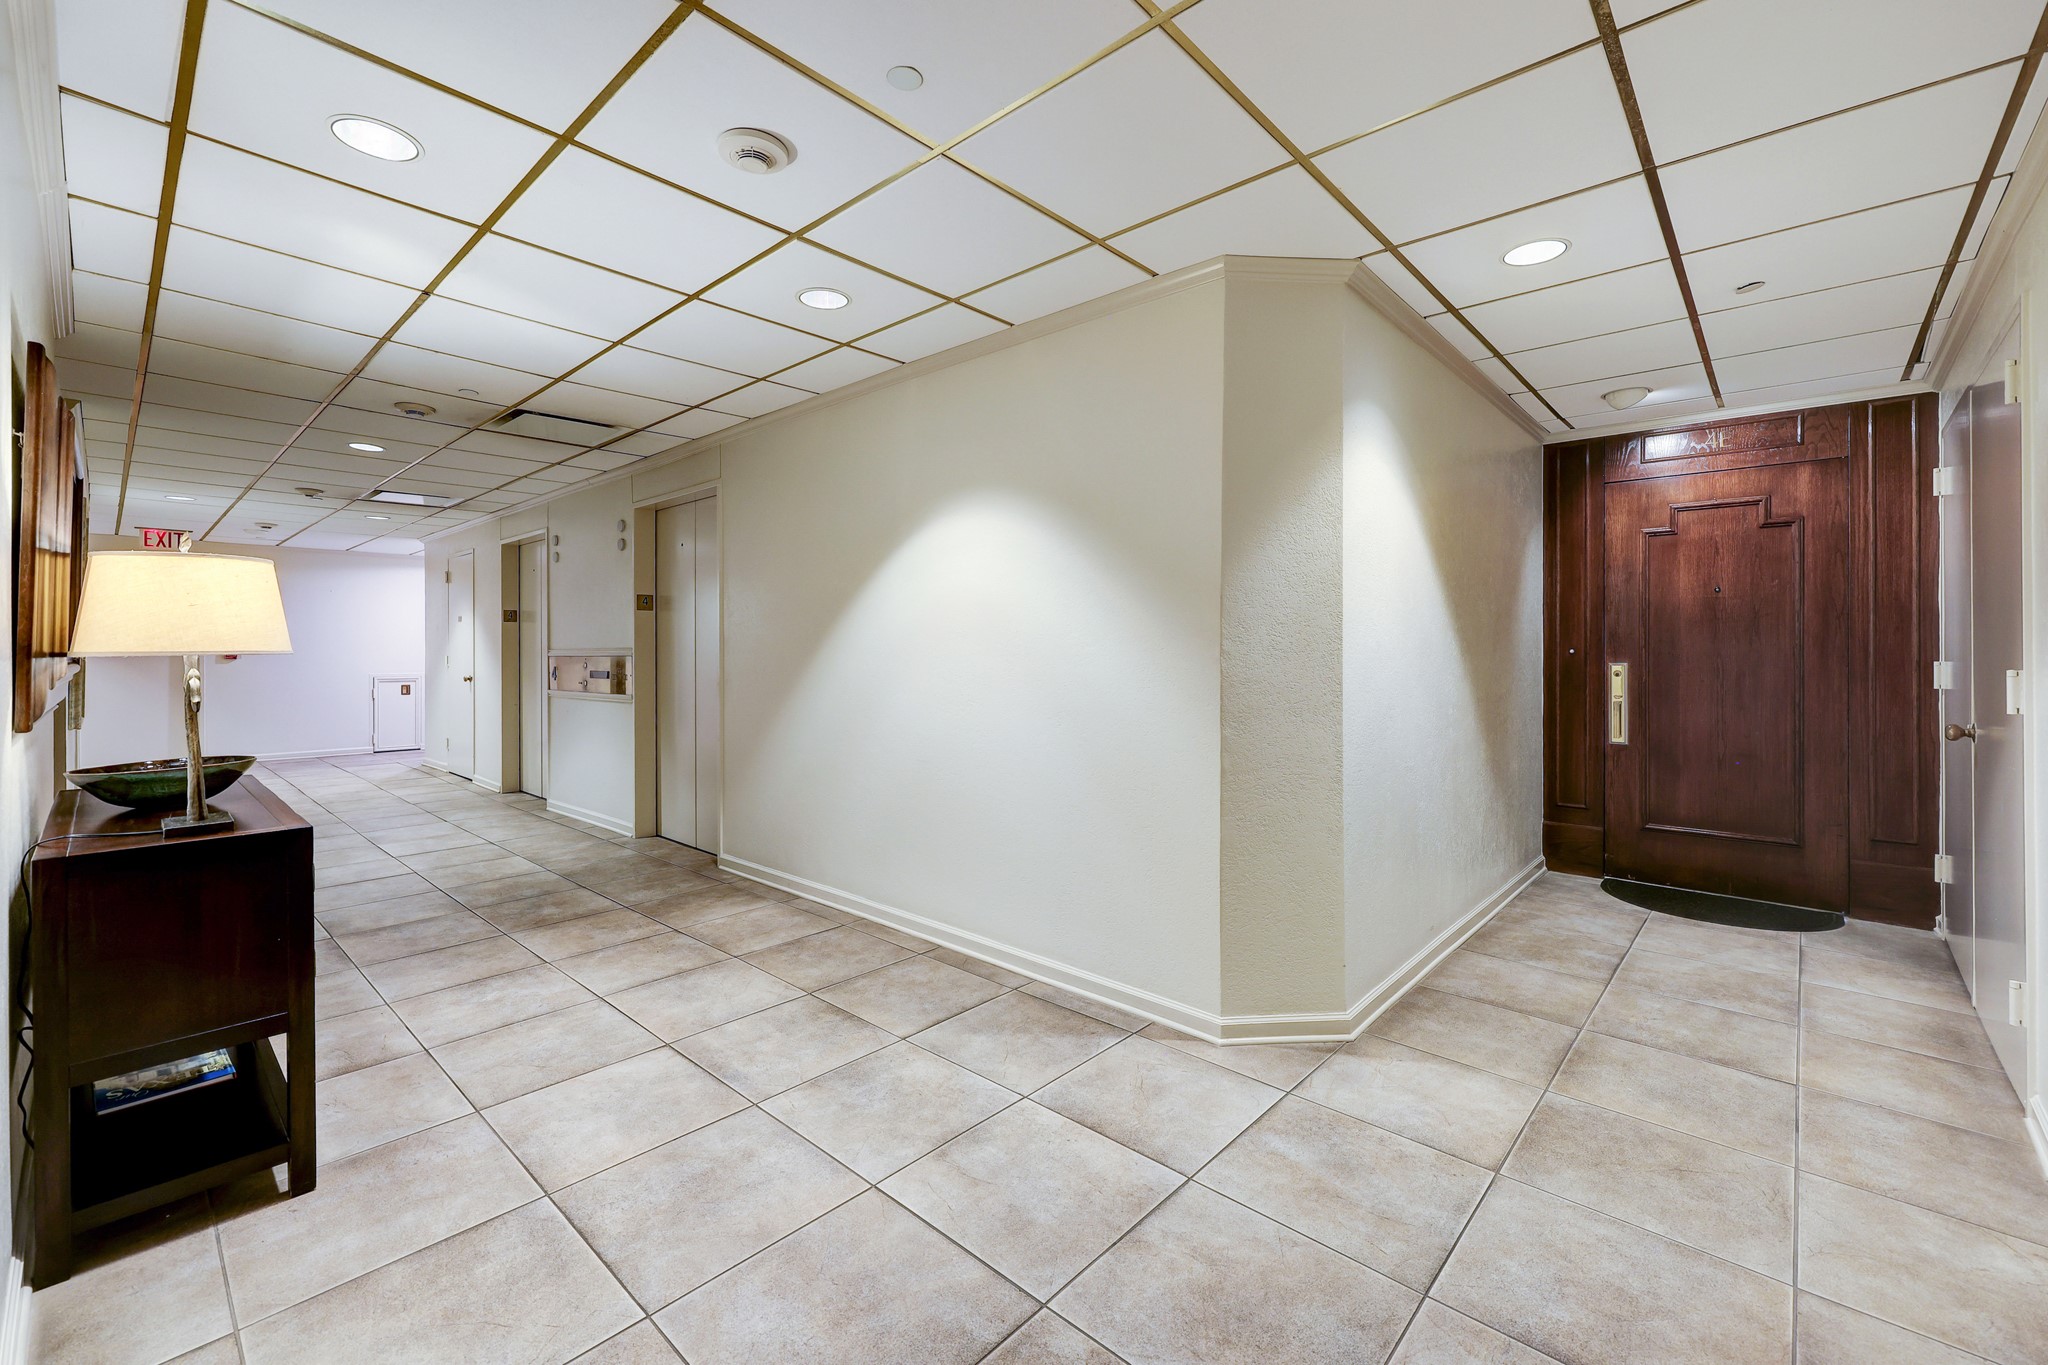 4th floor entry from elevators to Unit 4E